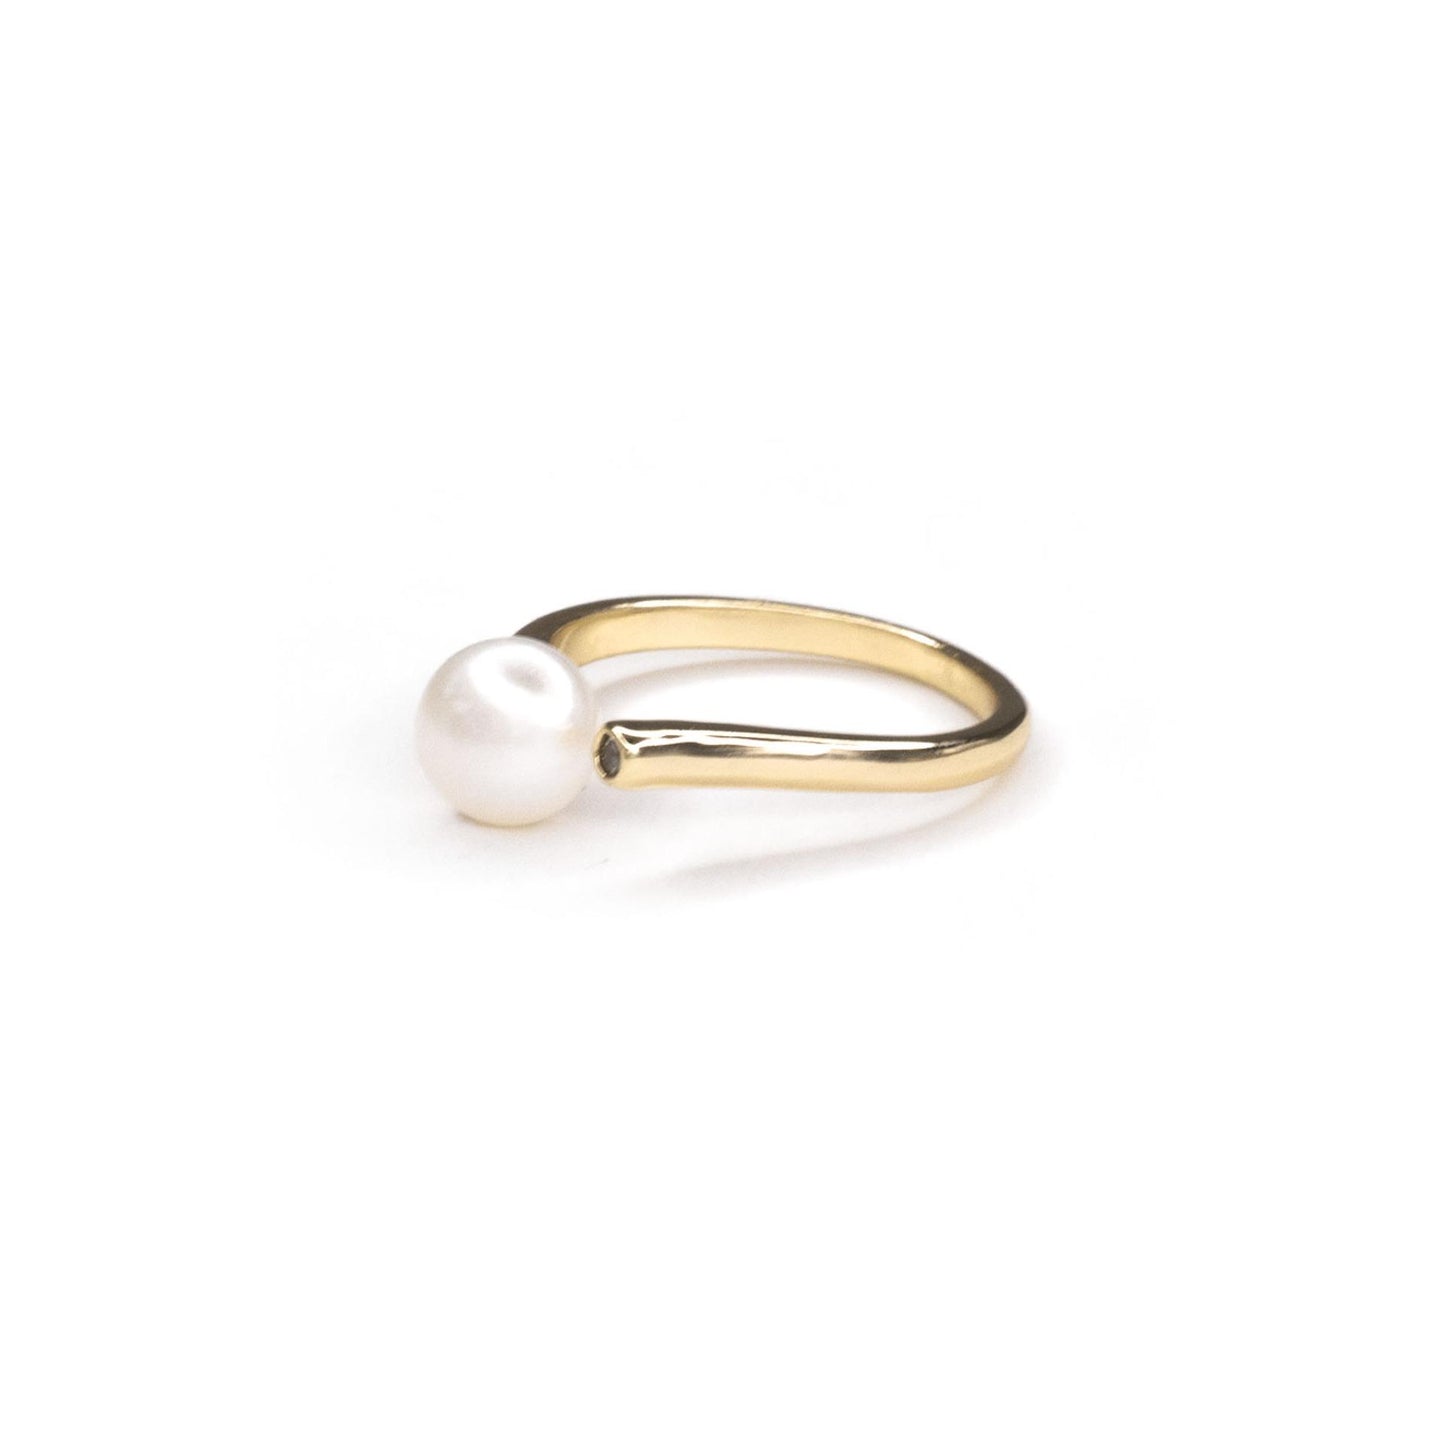 Peculiar Natural Pearls 18k Gold Plated Zircon Night and Day Open Ring